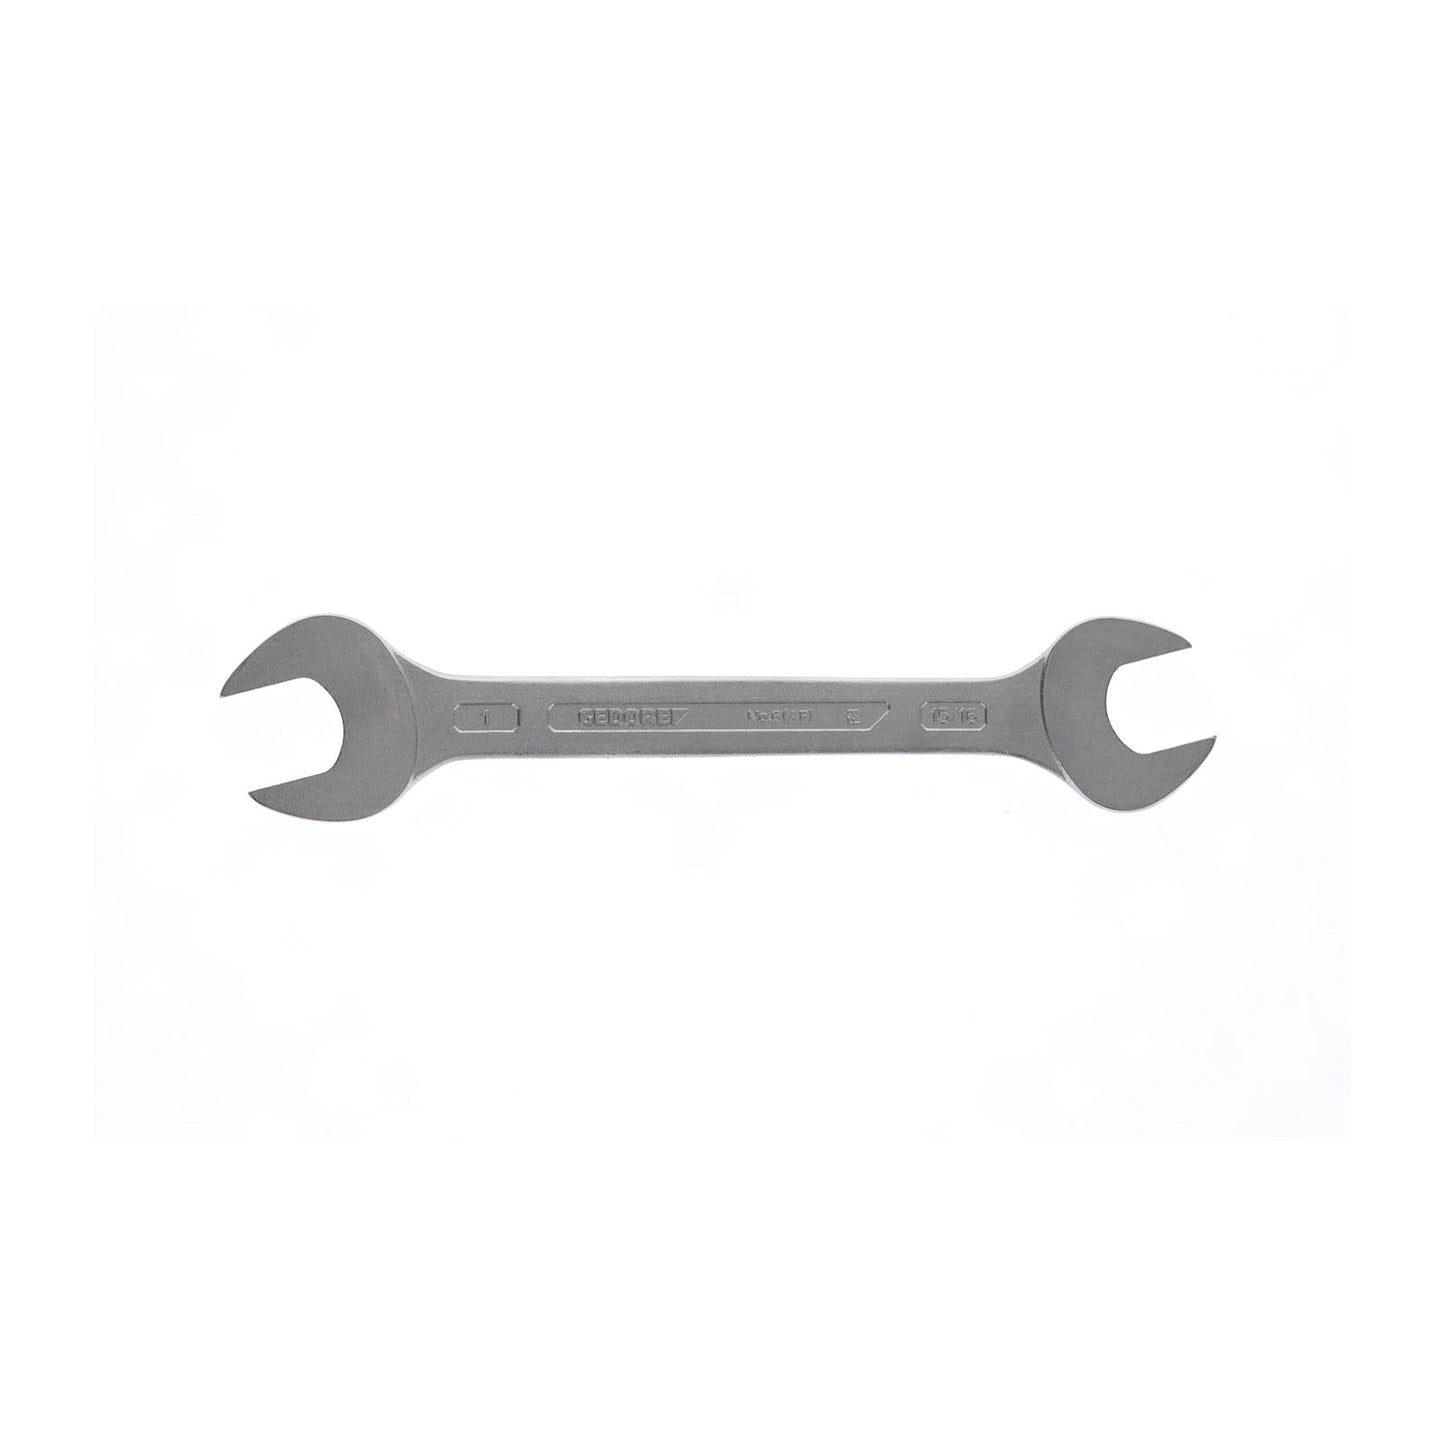 GEDORE 6 15/16X1AF - 2-Mount Fixed Wrench, 15/16x1AF (6071770)